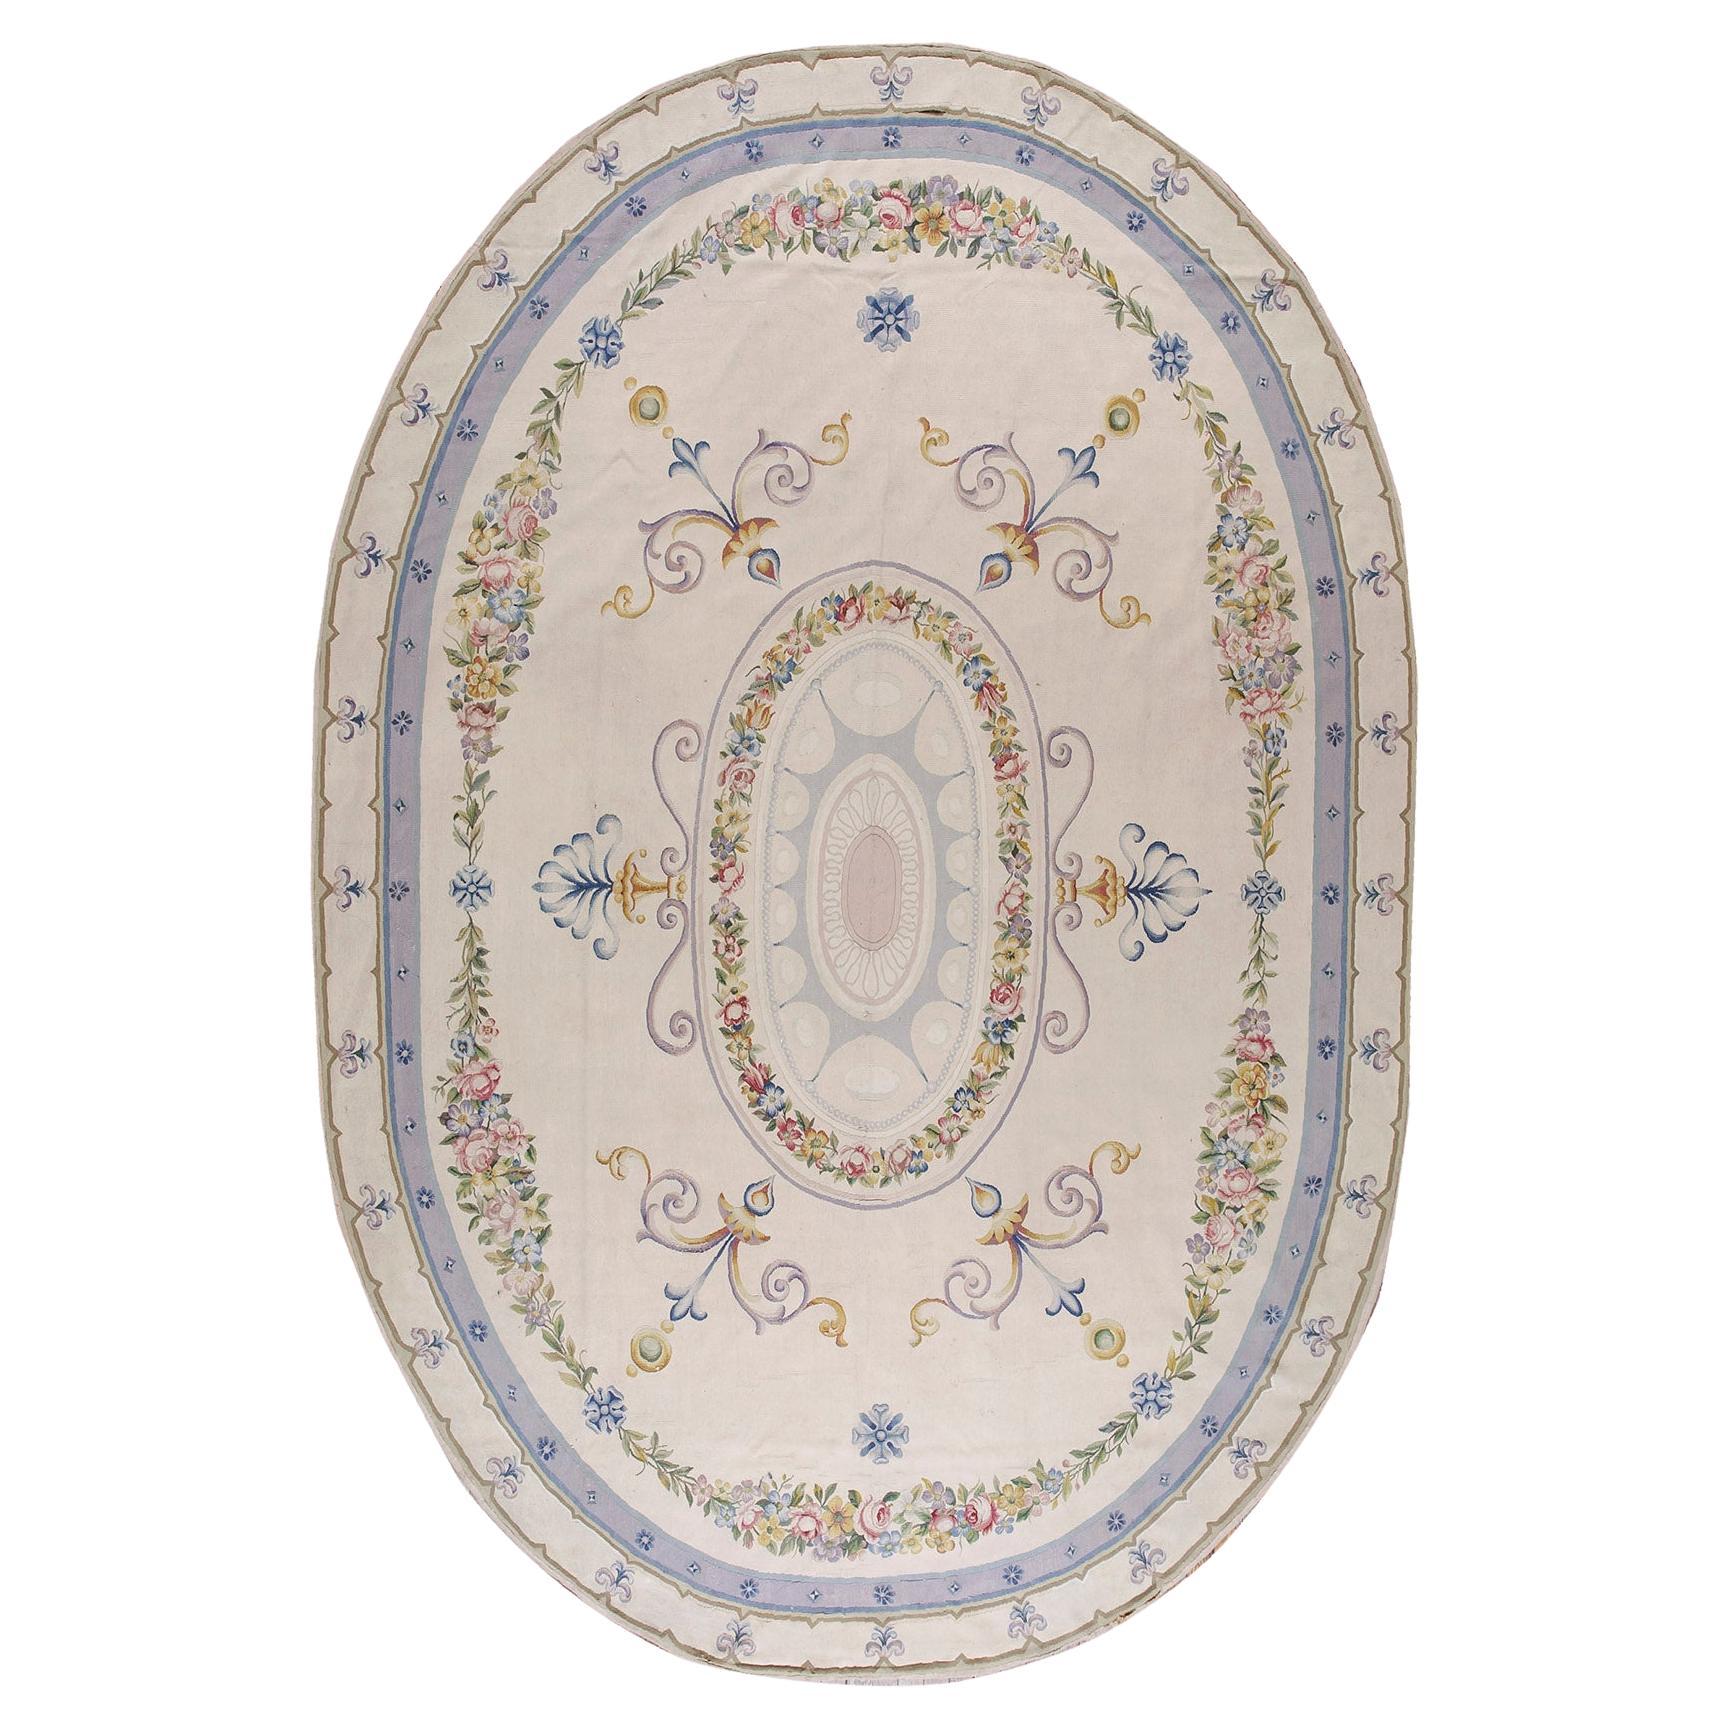 Late 19th Century Oval French Neo Classical Aubusson Carpet (8'8"x11' - 265x335) For Sale